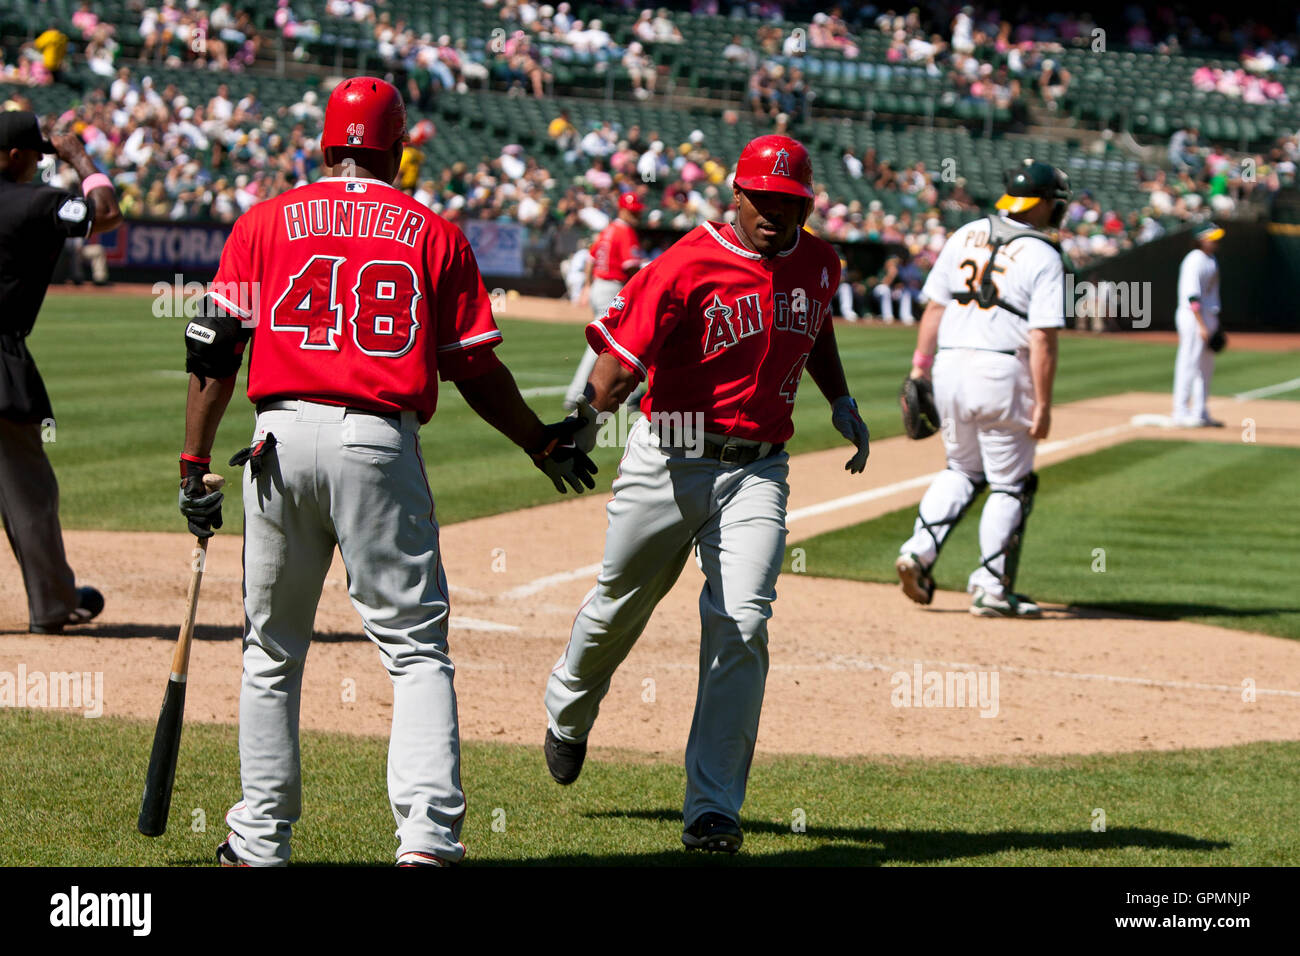 September 5, 2010; Oakland, CA, USA;  Los Angeles Angels second baseman Howard Kendrick (47) is congratulated by center fielder Torii Hunter (48) after scoring a run against the Oakland Athletics during the seventh inning at Oakland-Alameda County Coliseu Stock Photo